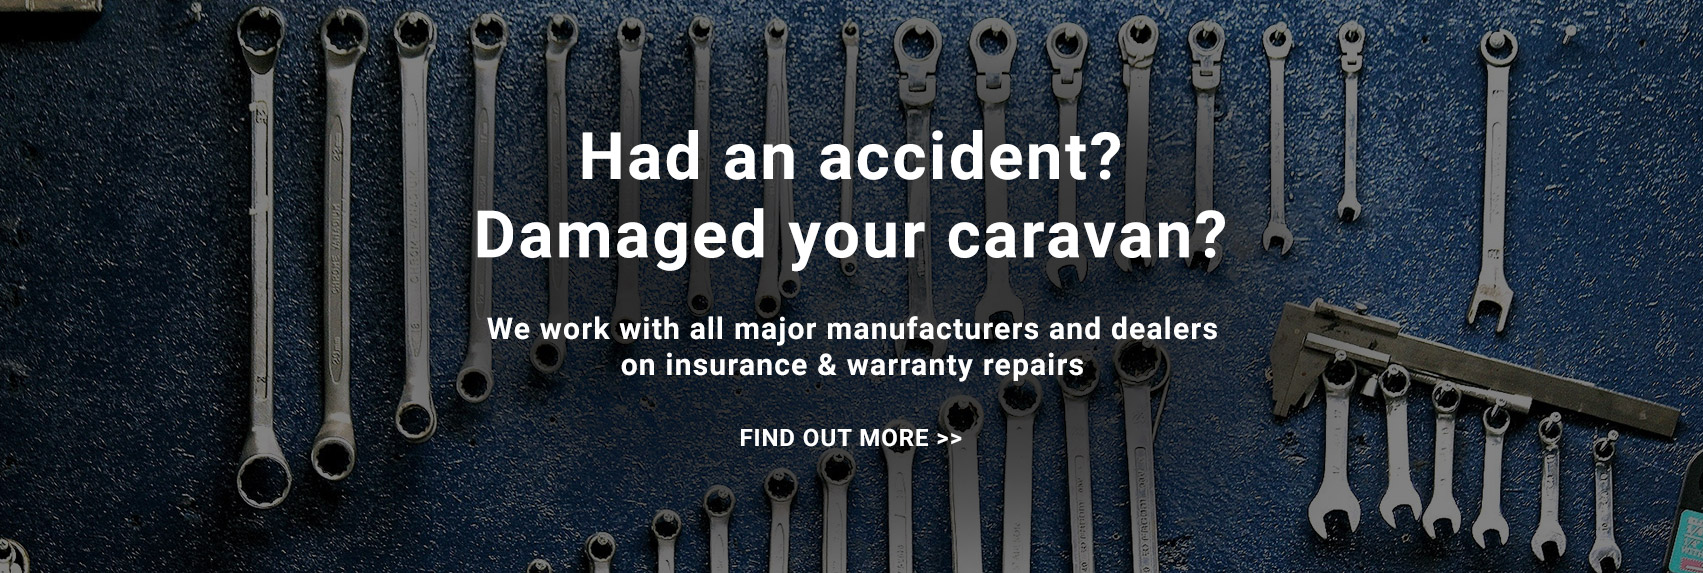 Accredited Insurance Repairs and Warranty